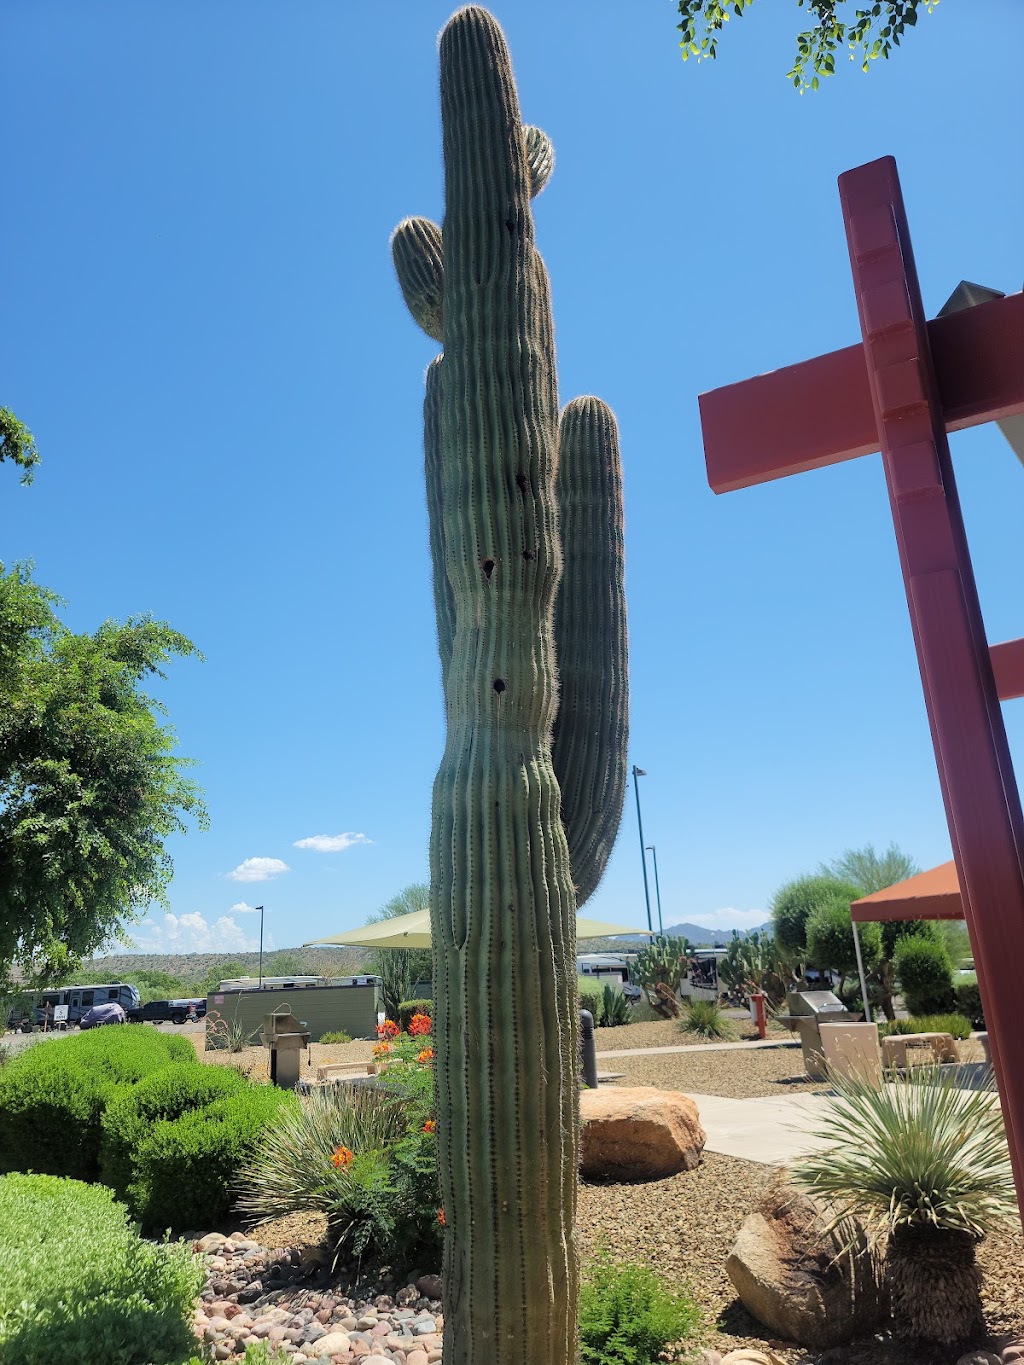 Eagle View RV Resort At Fort | 9605 N Fort McDowell Rd, Fort McDowell, AZ 85264, USA | Phone: (480) 789-5310